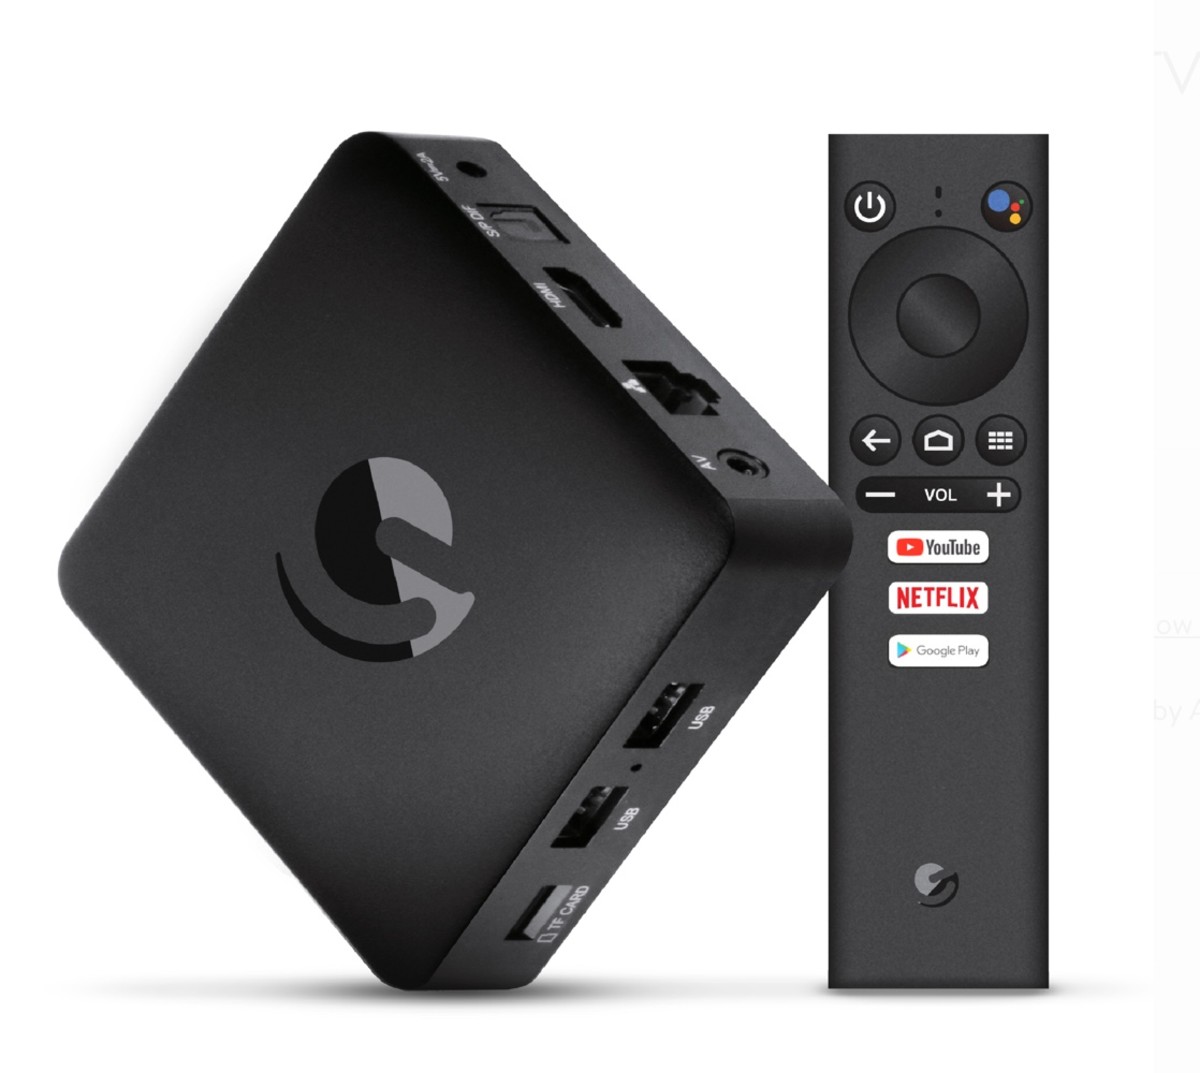 Jetstream’s 4K Ultra HD Android TV Box is affordable 4K streaming